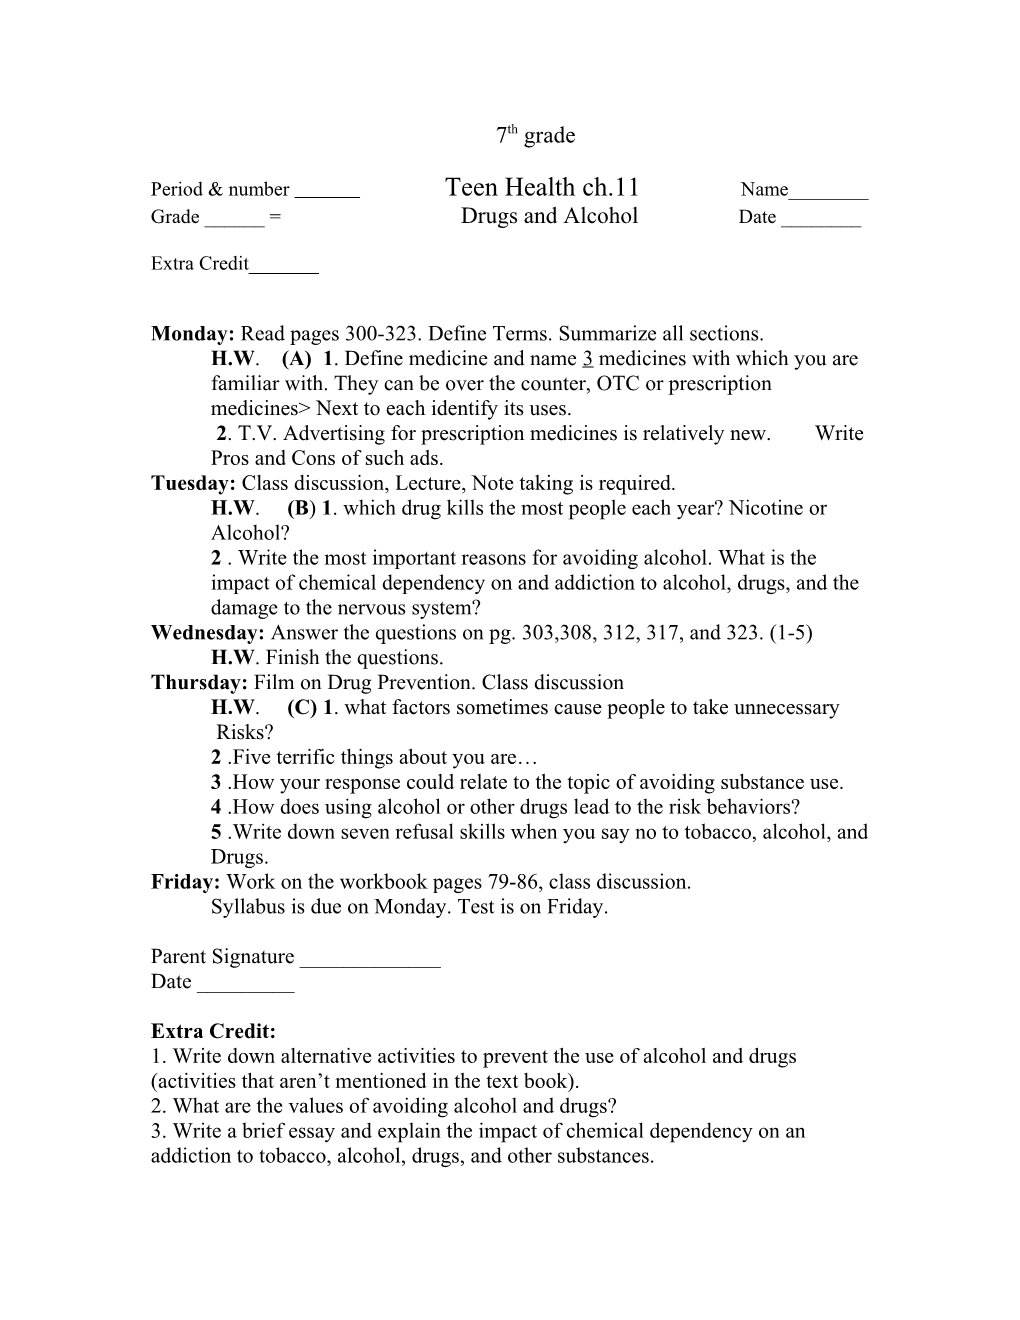 Period & Number Teen Health Ch